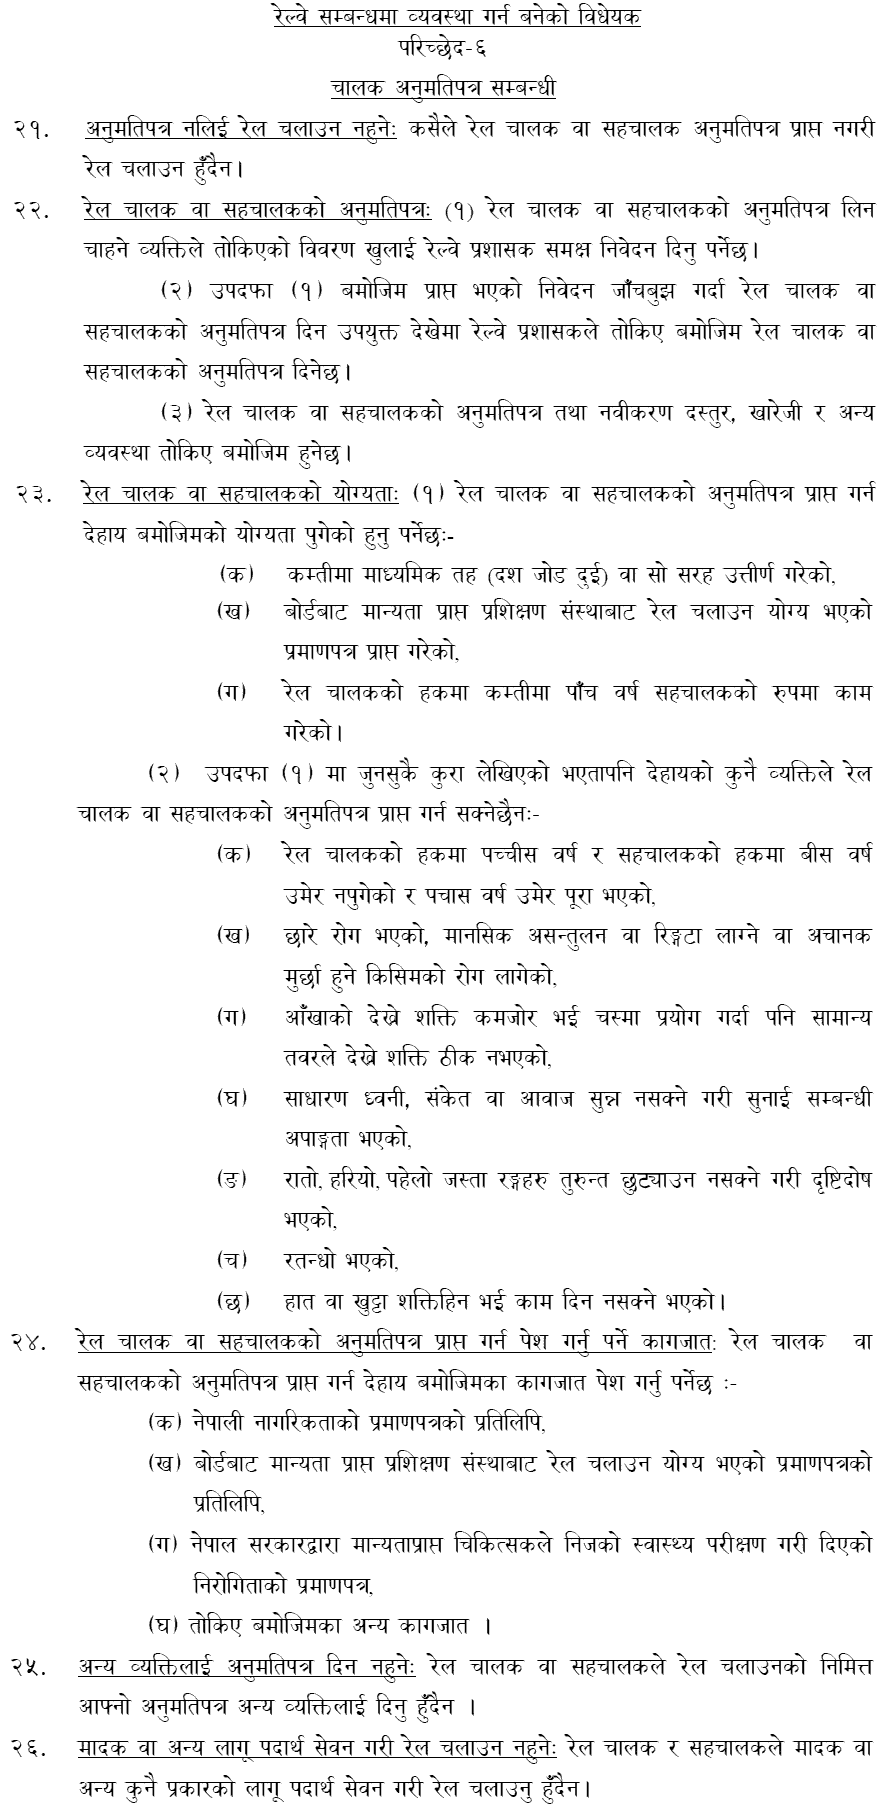 Eligibility Criteria for Railway or Train Driver in Nepal